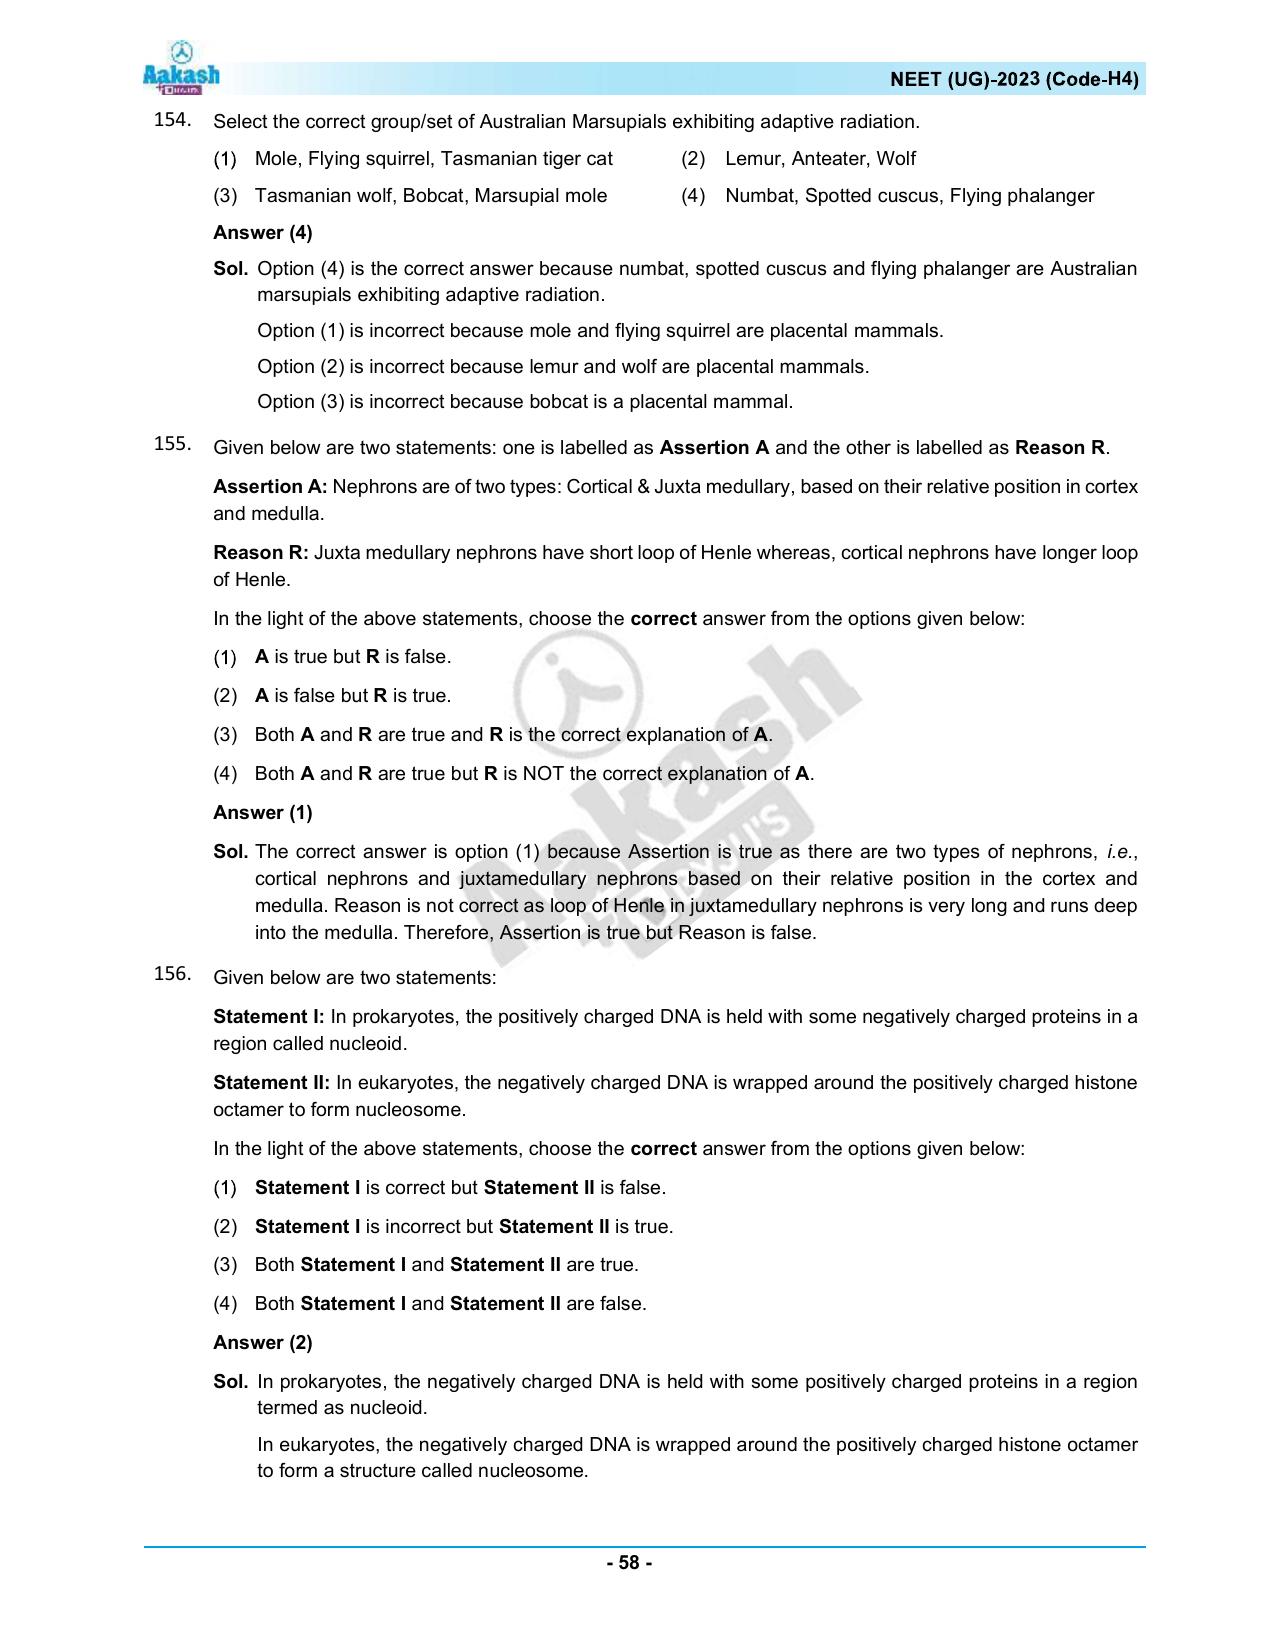 NEET 2023 Question Paper H4 - Page 58